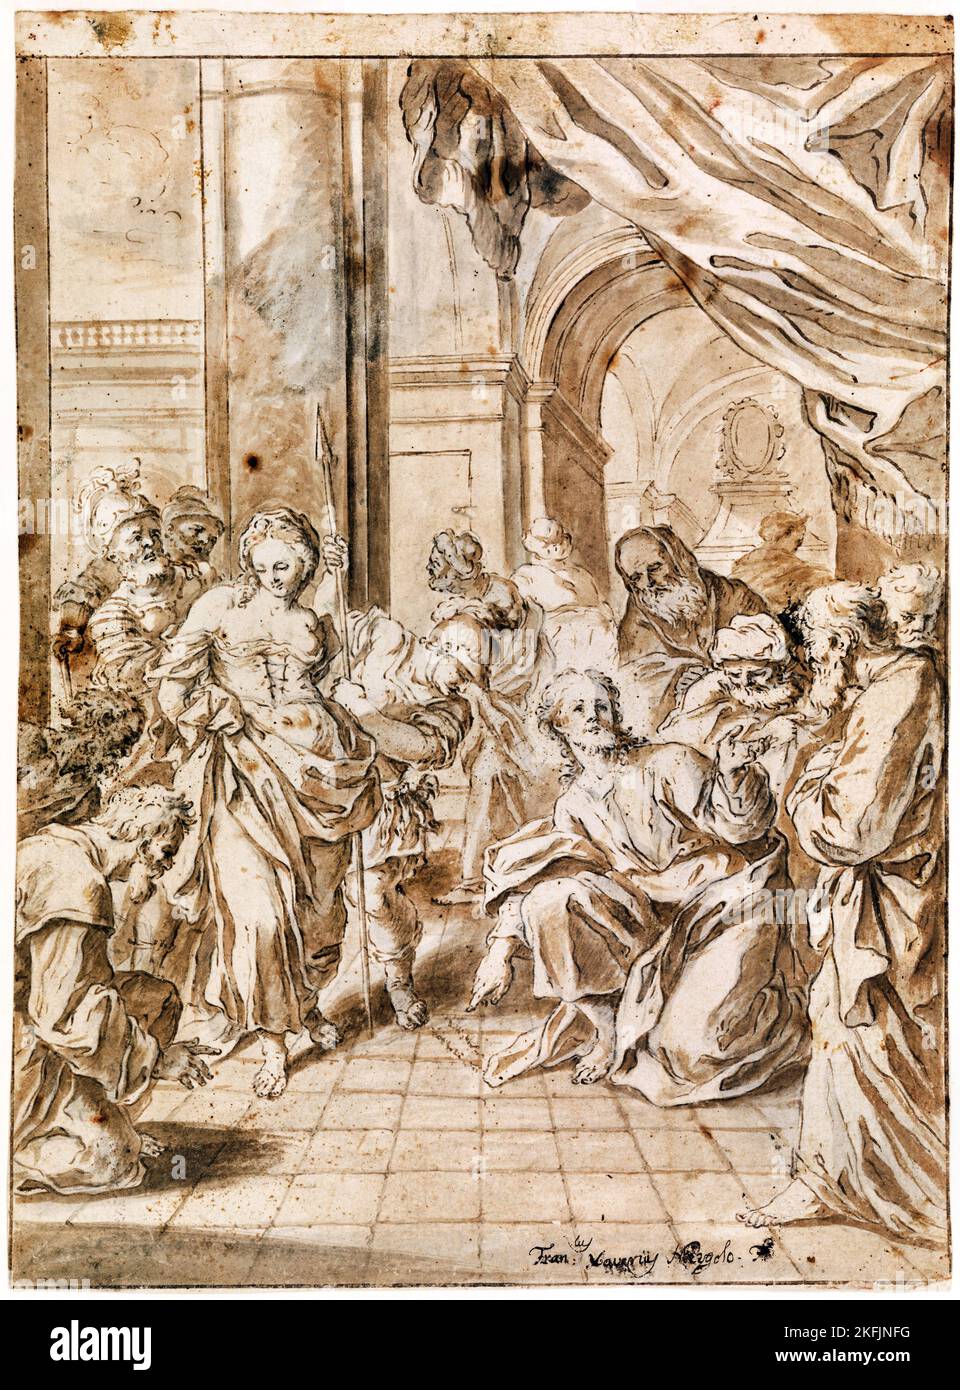 Francesco Saverio Mergolo; Christ and the Adulterous Woman; Circa 1750-1760; Pen and brown ink on paper; Cooper Hewitt, Smithsonian Design Museum, New Stock Photo